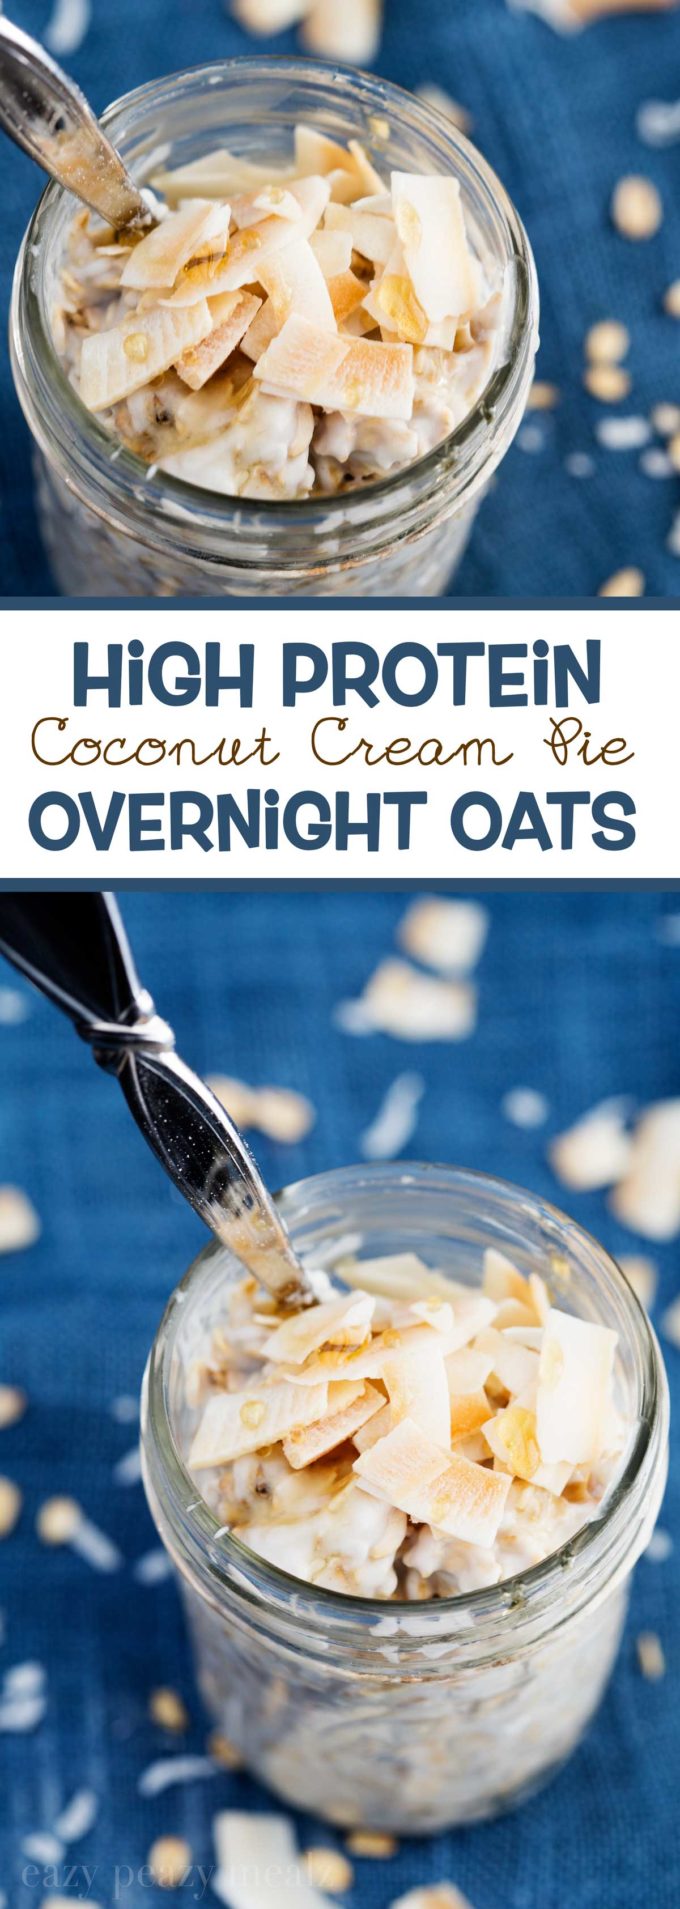 High Protein Coconut Cream Pie Overnight Oats, made with Vital Proteins collagen peptides. #ad